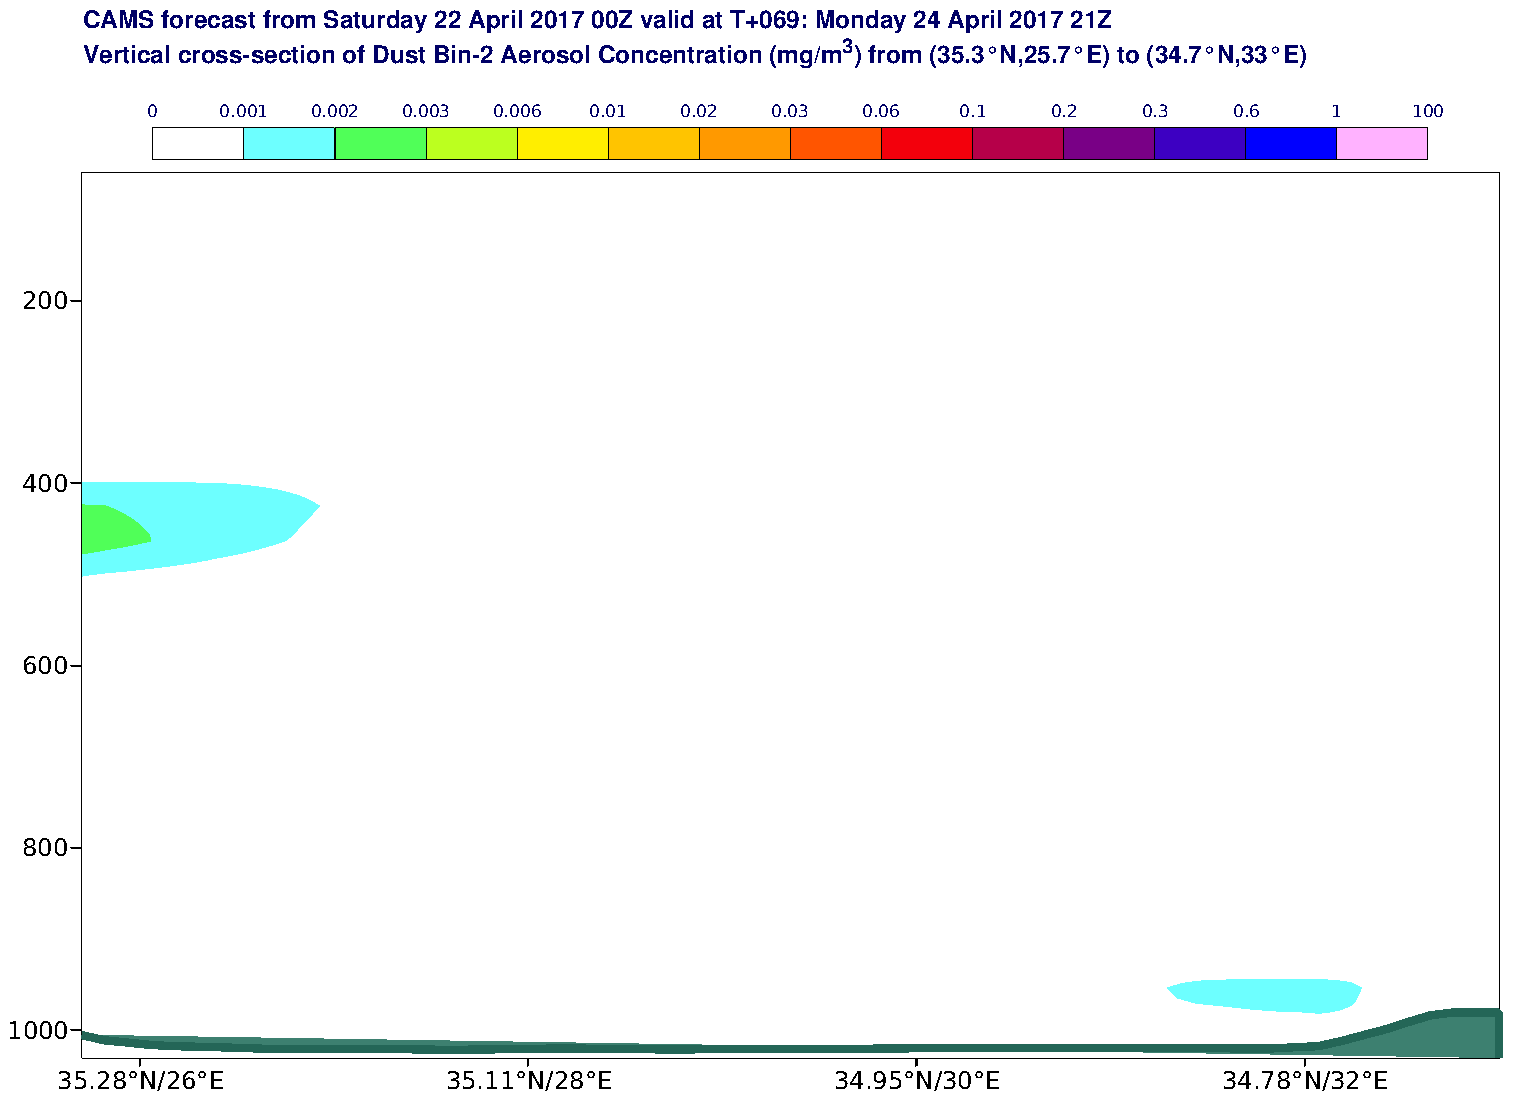 Vertical cross-section of Dust Bin-2 Aerosol Concentration (mg/m3) valid at T69 - 2017-04-24 21:00